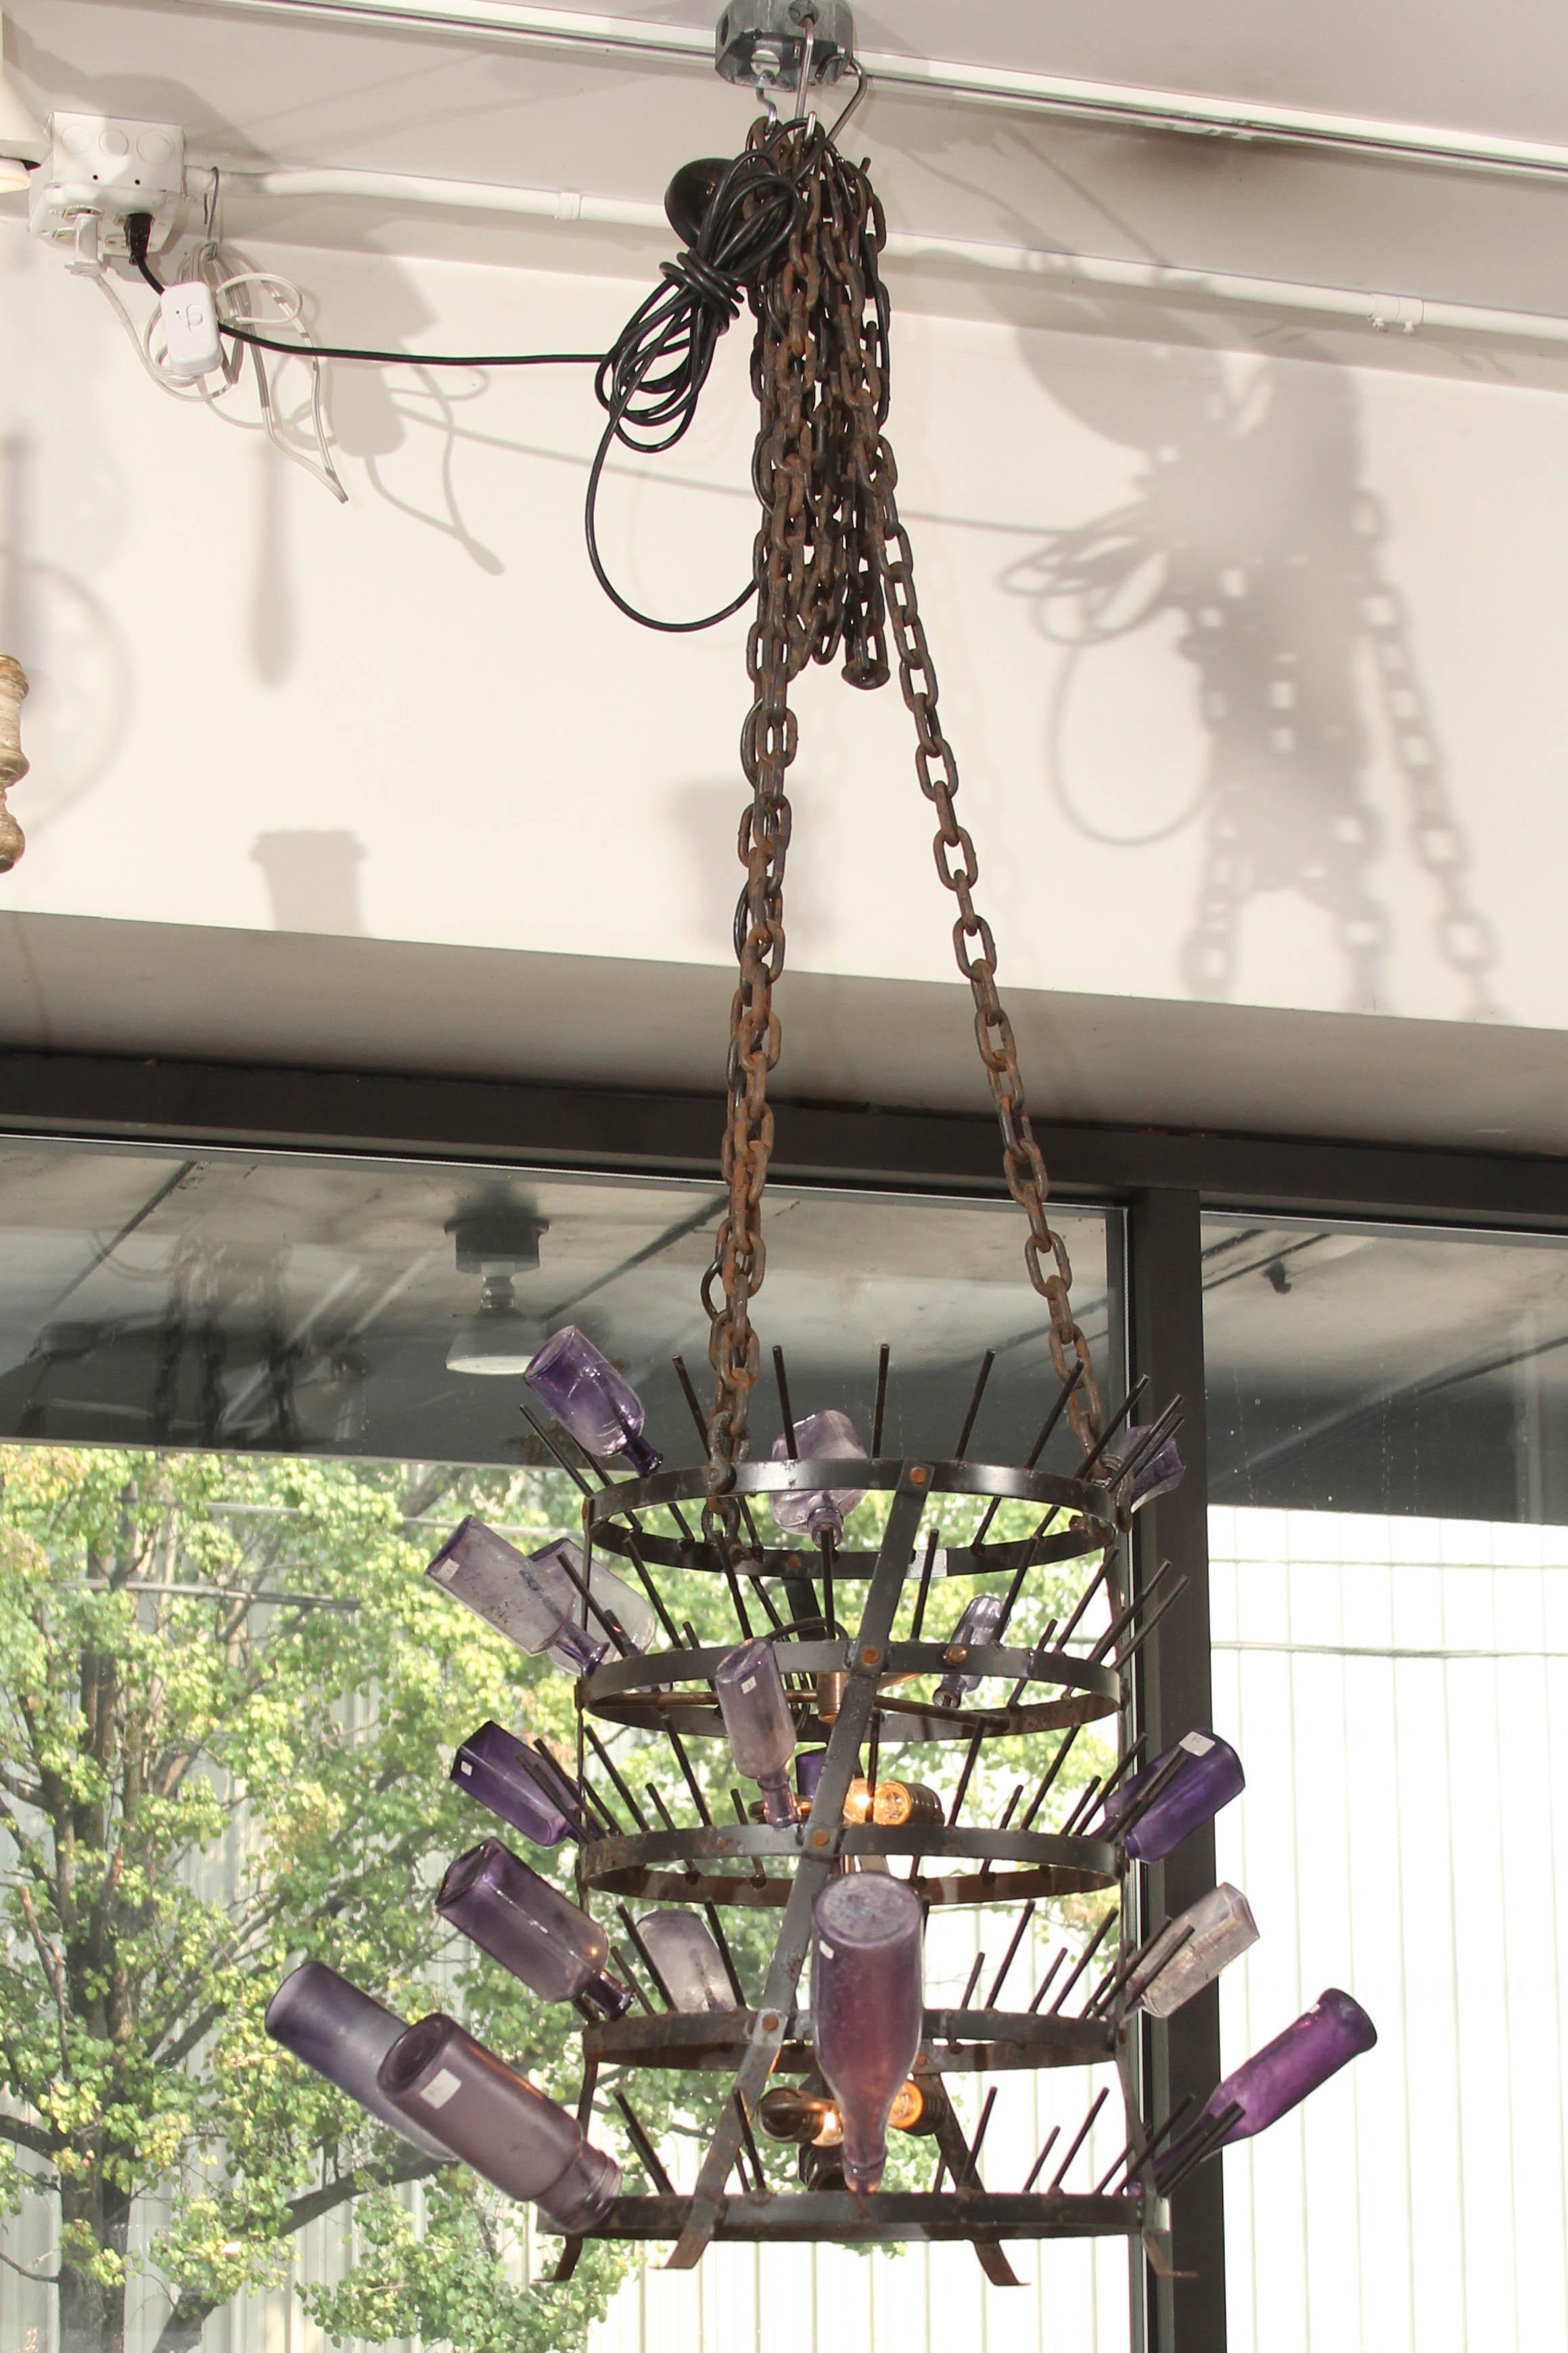 Great looking antique iron bottle rack as chandelier. Four lights, very long chain, so it can fill a tall staircase or be shortened for an 8ft ceiling. (Bottles are not included, but are available for purchase-ask dealer) great for a wine cellar or